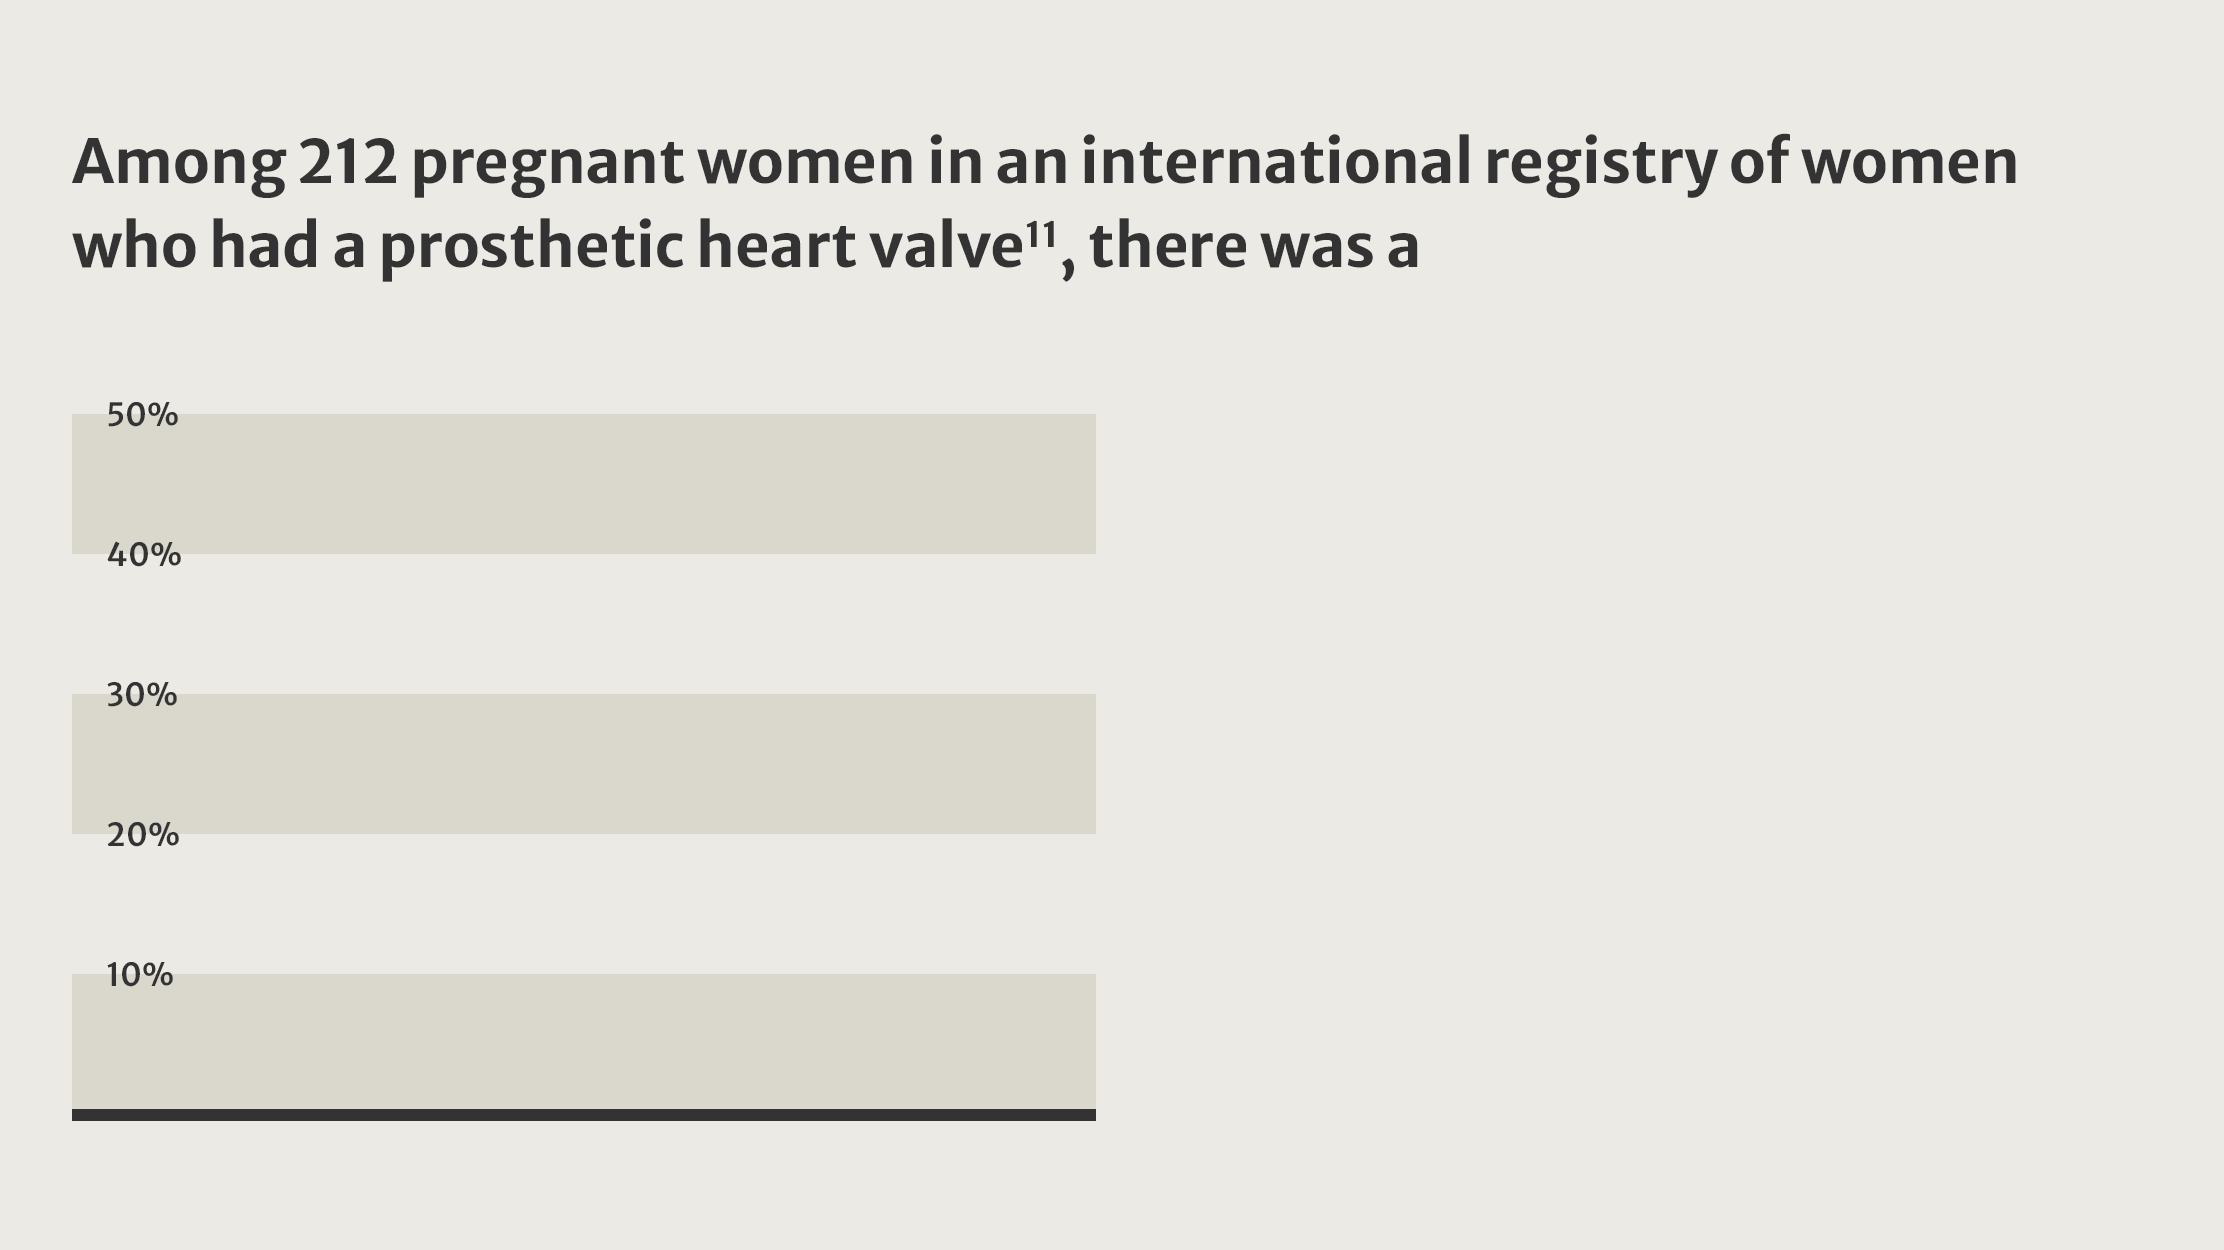 Among 212 pregnant women in an international registry of women who had a prosthetic heart valve.